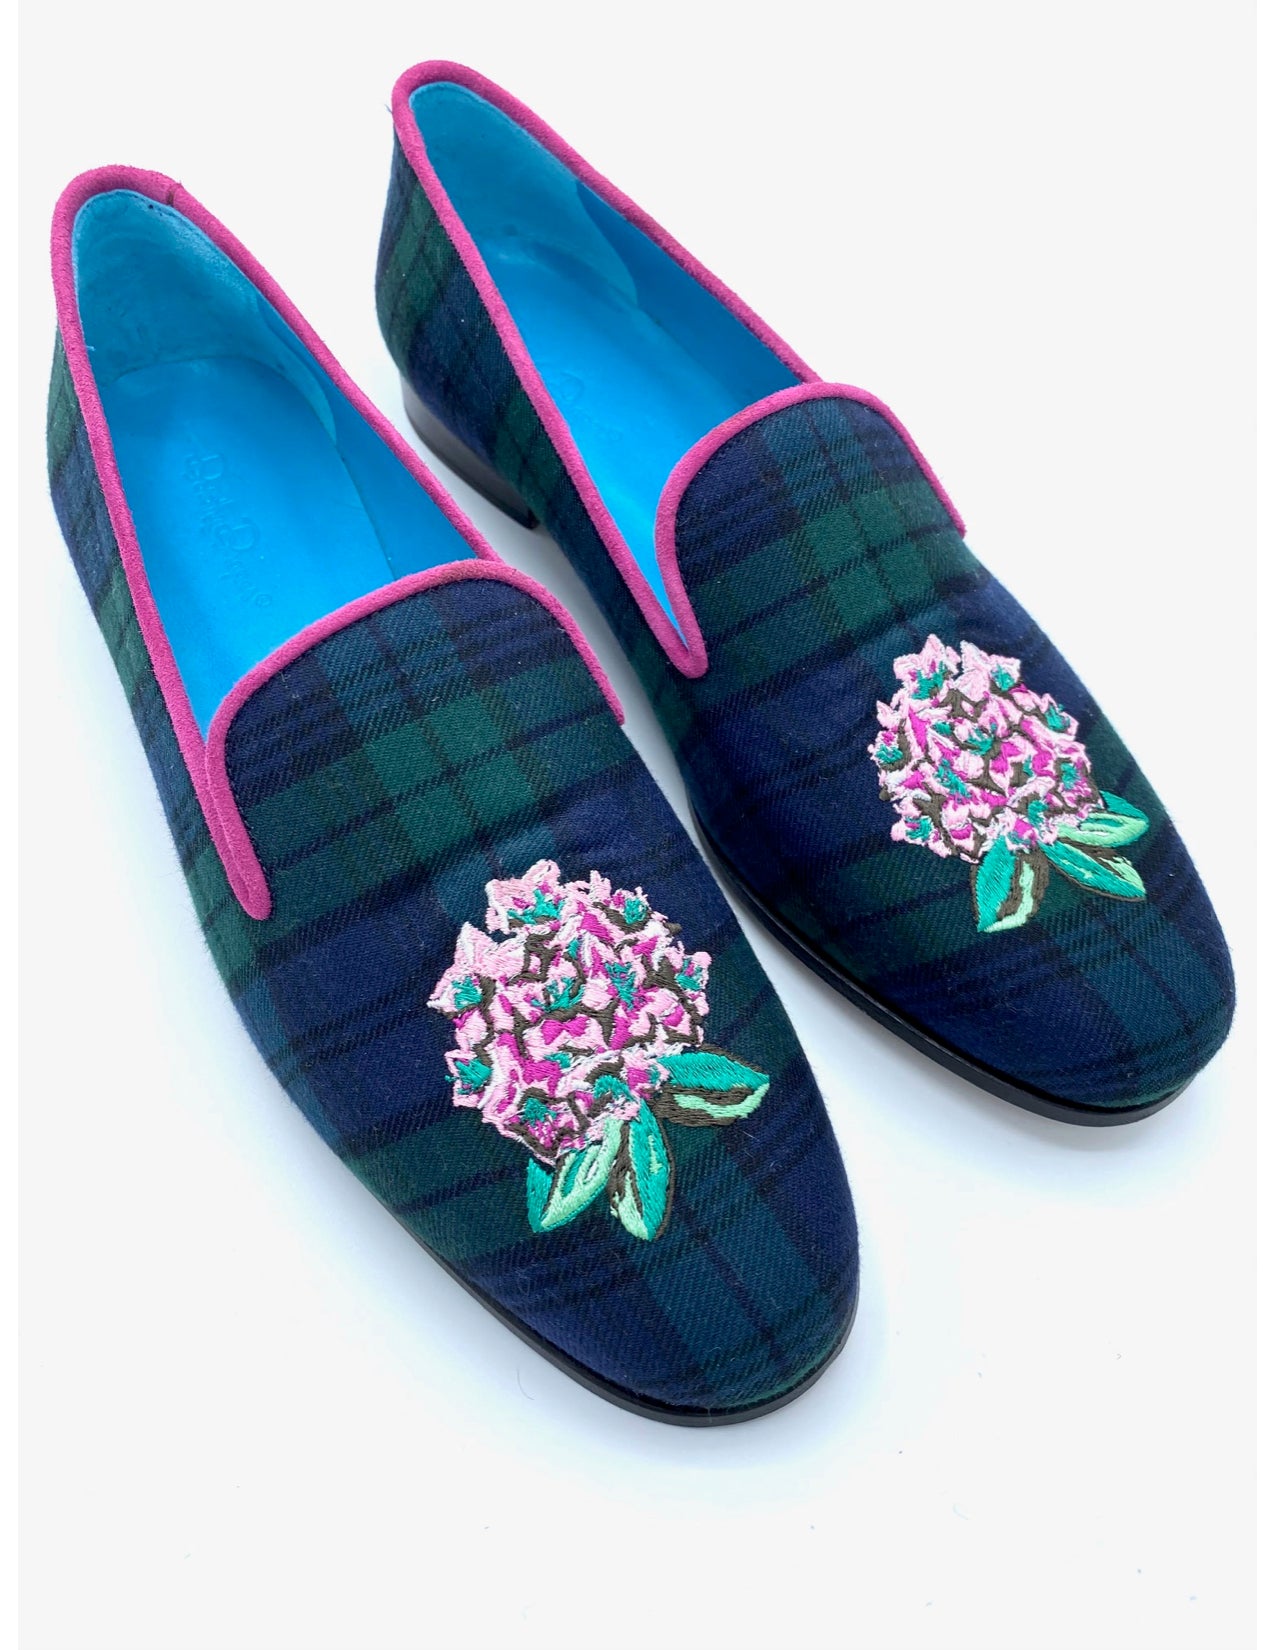 Dorothy Draper Rhododendron Shoes, Plaid w/ Pink Suede Trim